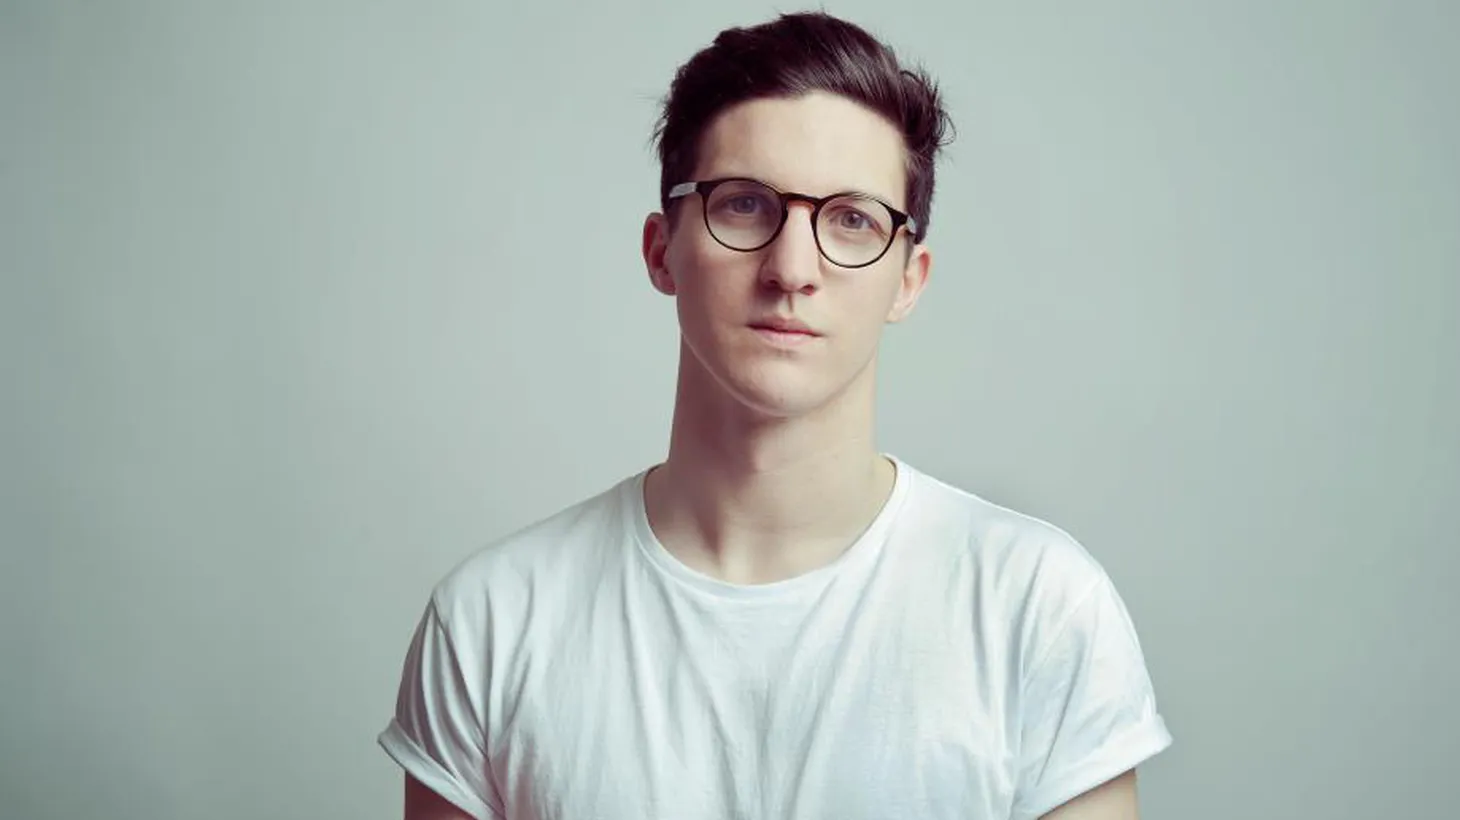 Liverpool's Dan Croll has been steadily releasing great pop songs for over a year. He's an artist to watch.